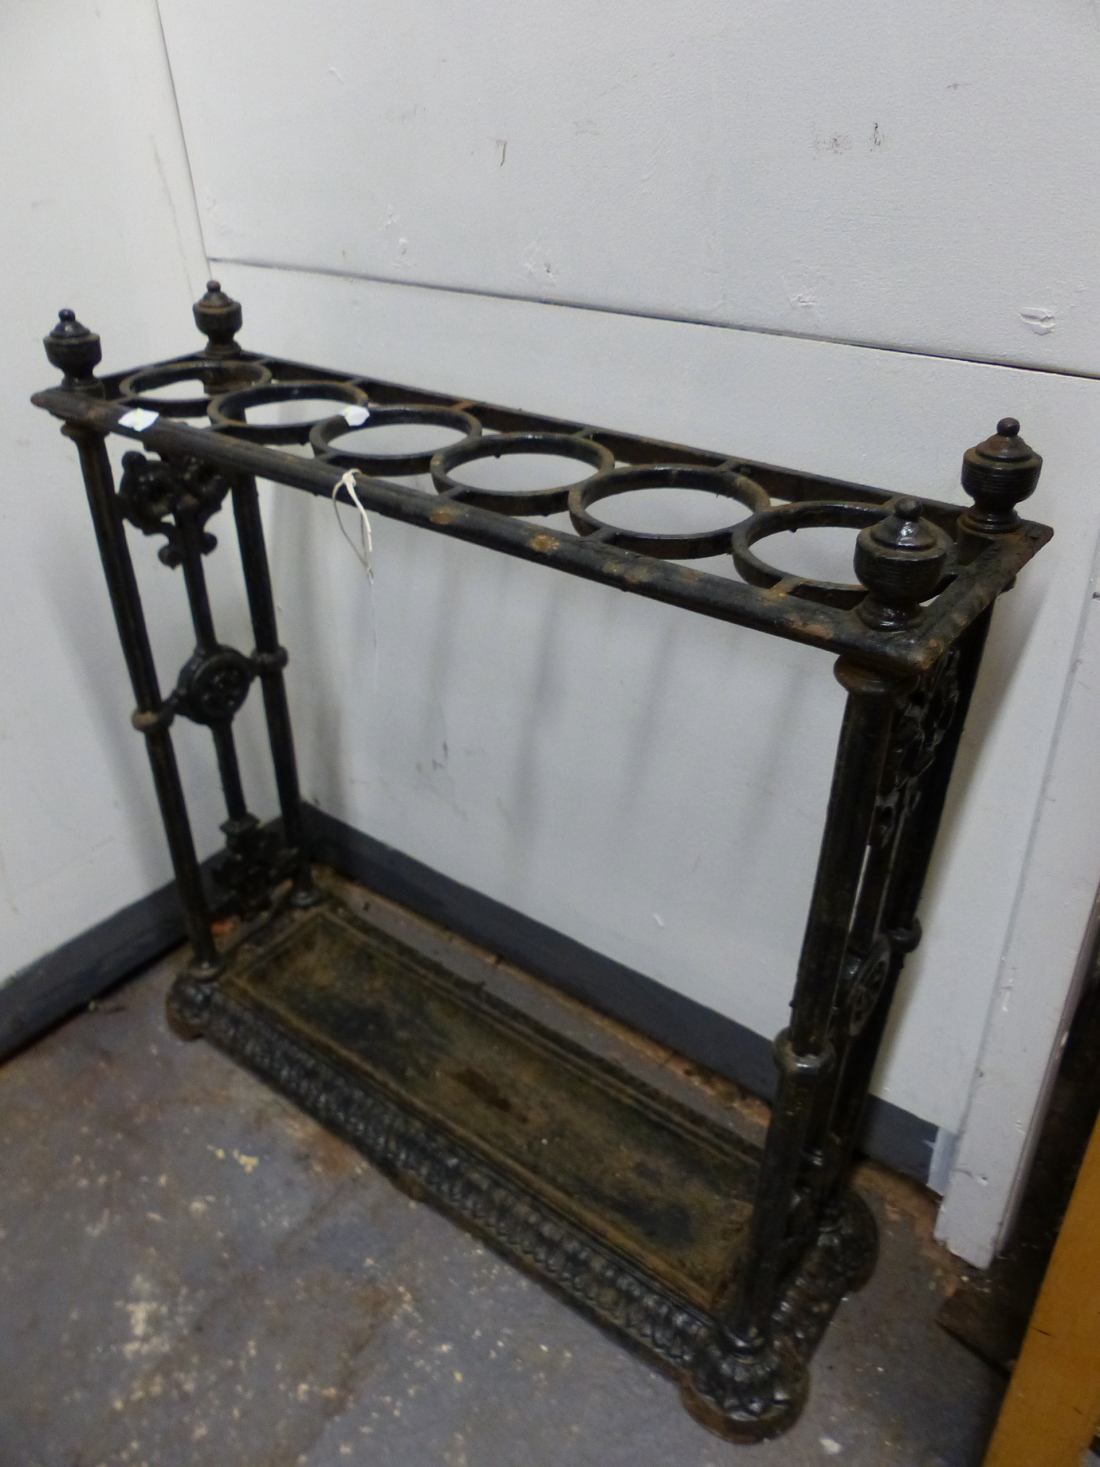 AN ANTIQUE COALBROOKDALE STYLE CAST IRON STICK STAND, THE TOP WITH SIX CIRCULAR HOLDERS, THE CENTRAL